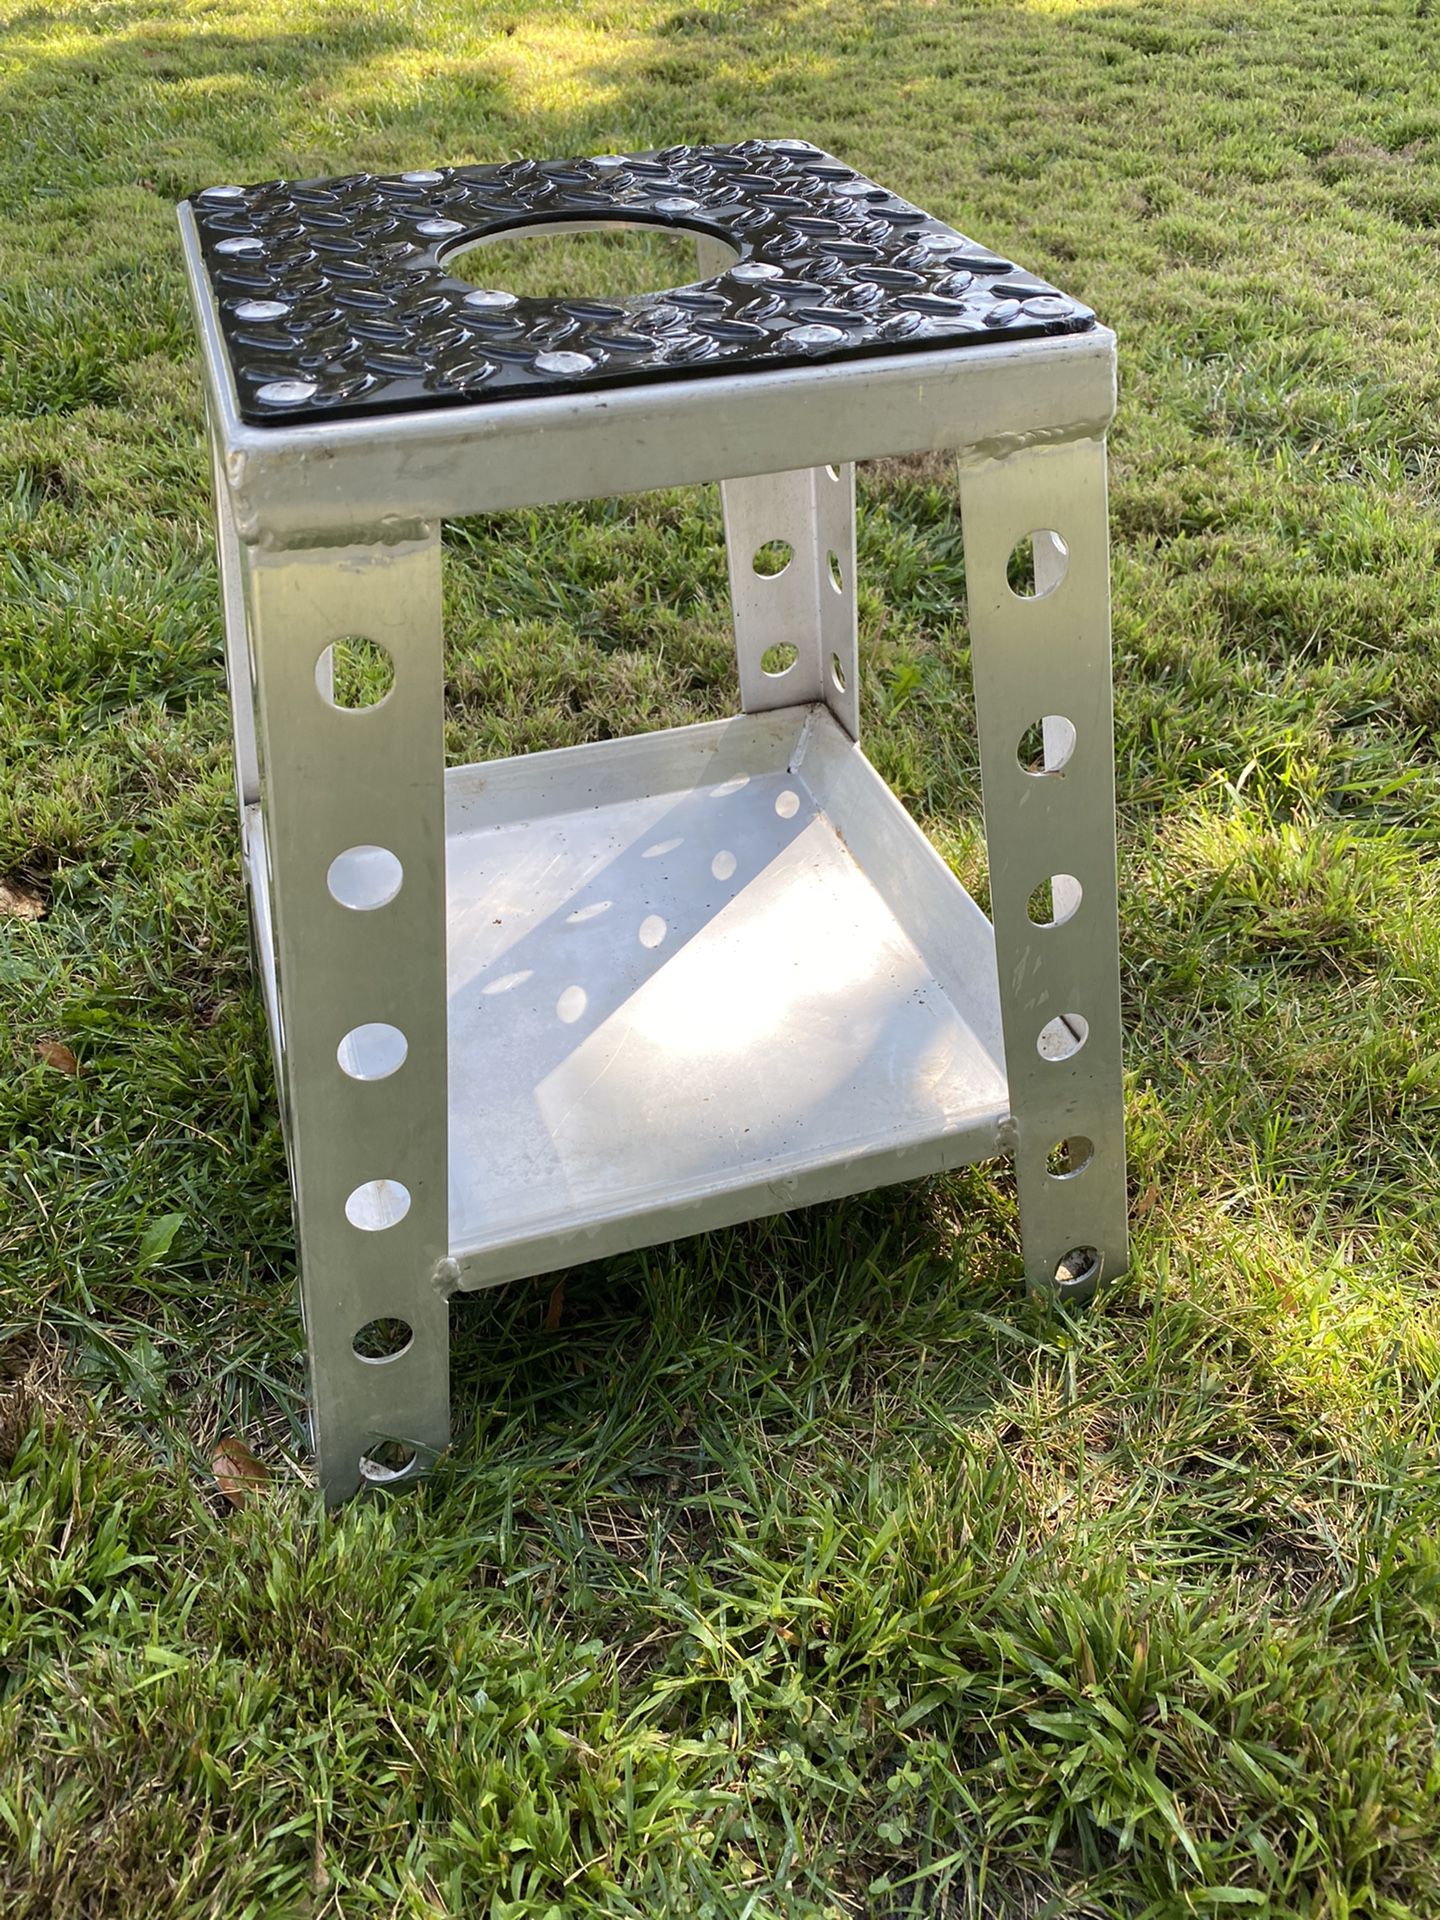 Dirt Bike Stand With Oil Pan